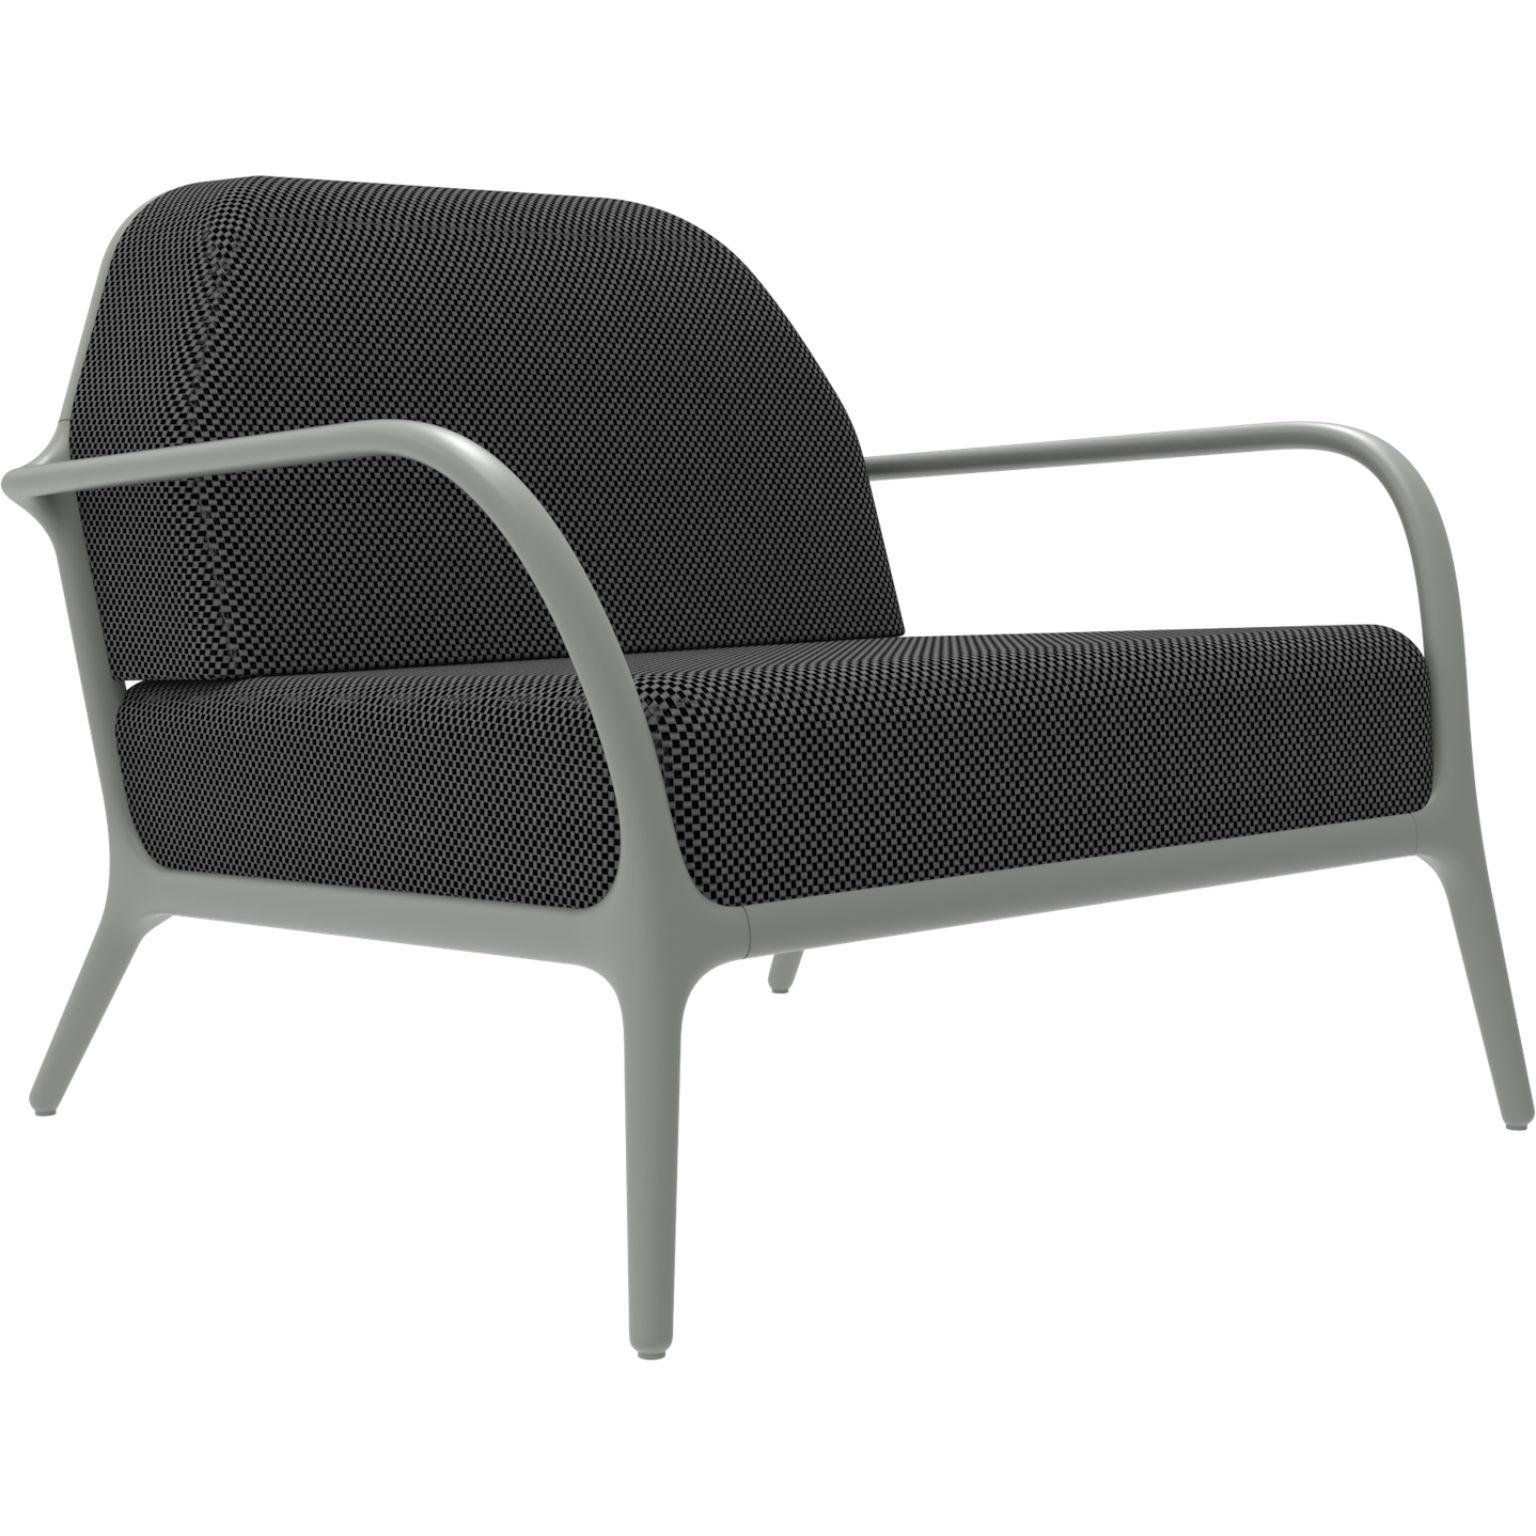 Xaloc Silver Amchair by MOWEE
Dimensions: D 100 x W 102 x H 81 cm (Seat Height 42 cm)
Material: Aluminum, Upholstery
Weight: 29 kg
Also available in different colours and finishes. Please contact us.

 Xaloc synthesizes the lines of interior